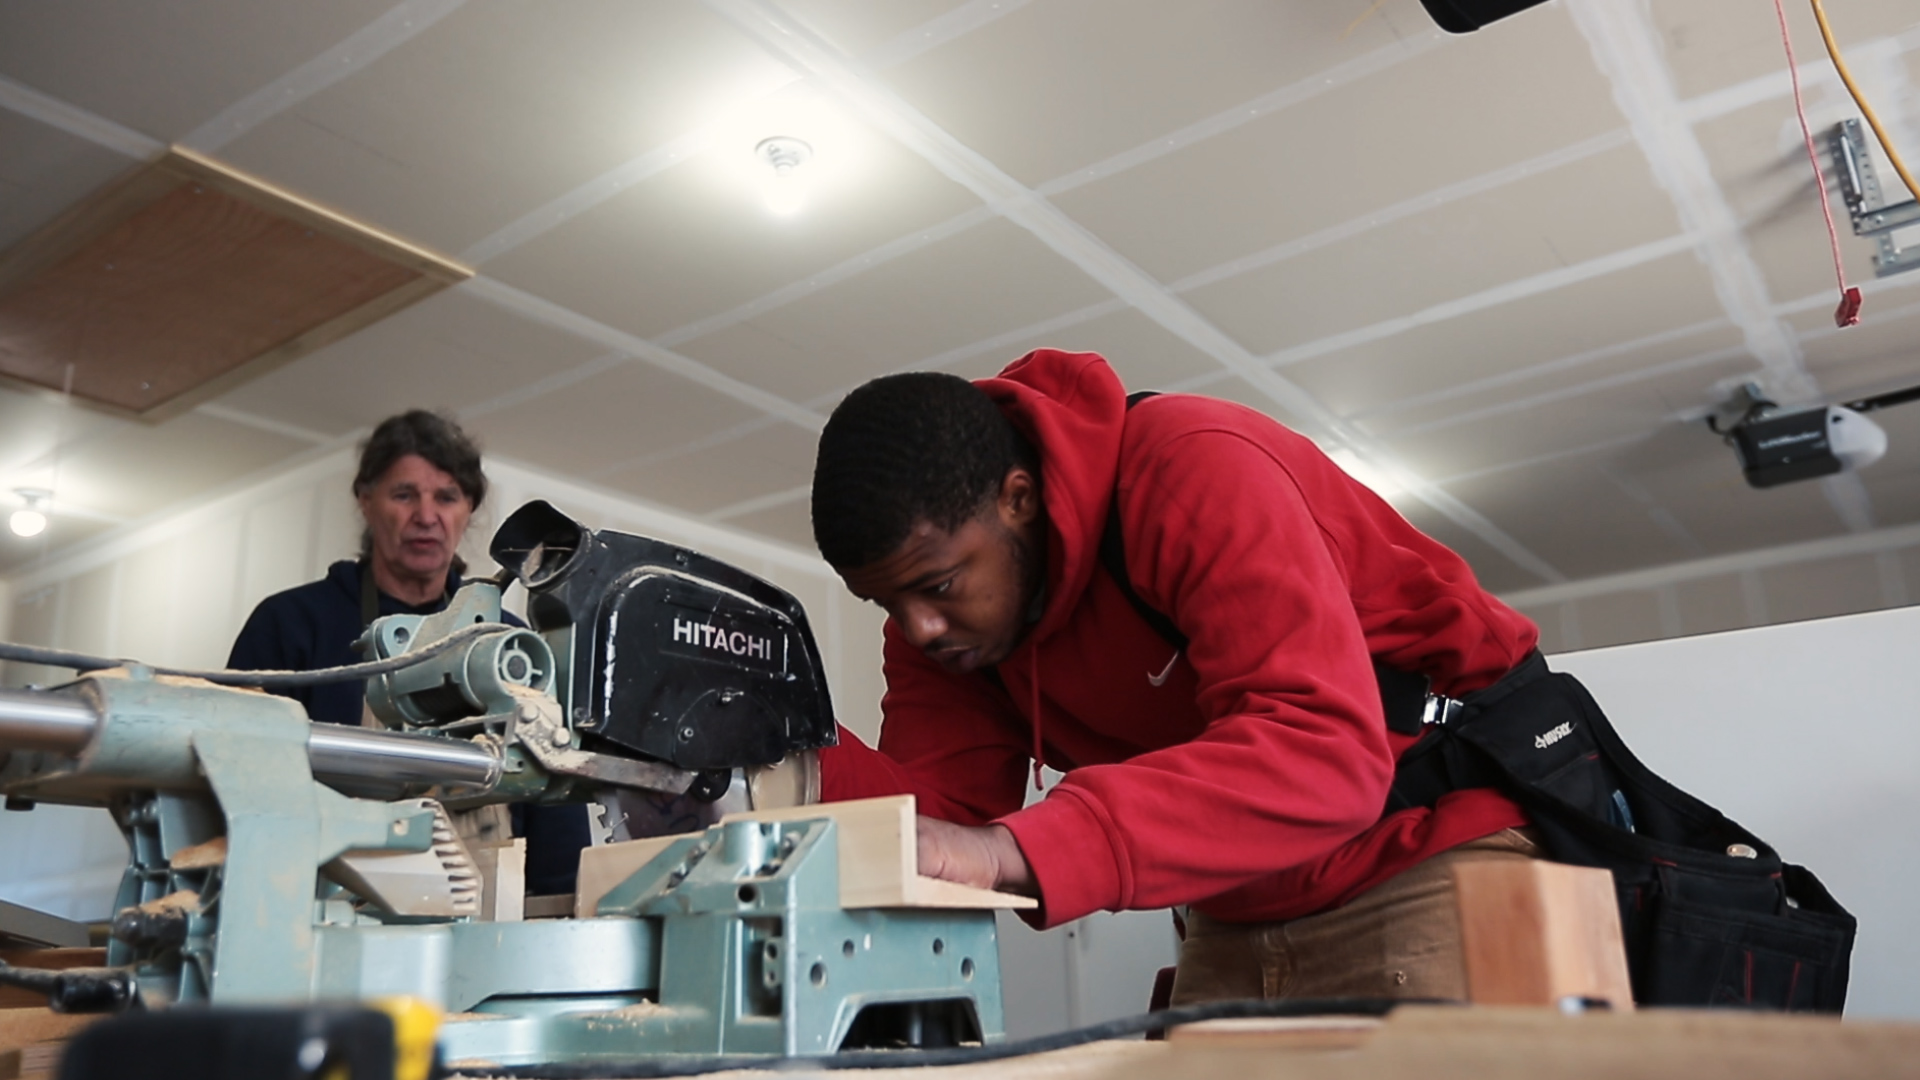 foster care: Young man in red hoodie leans over machinery, older man watches in background.